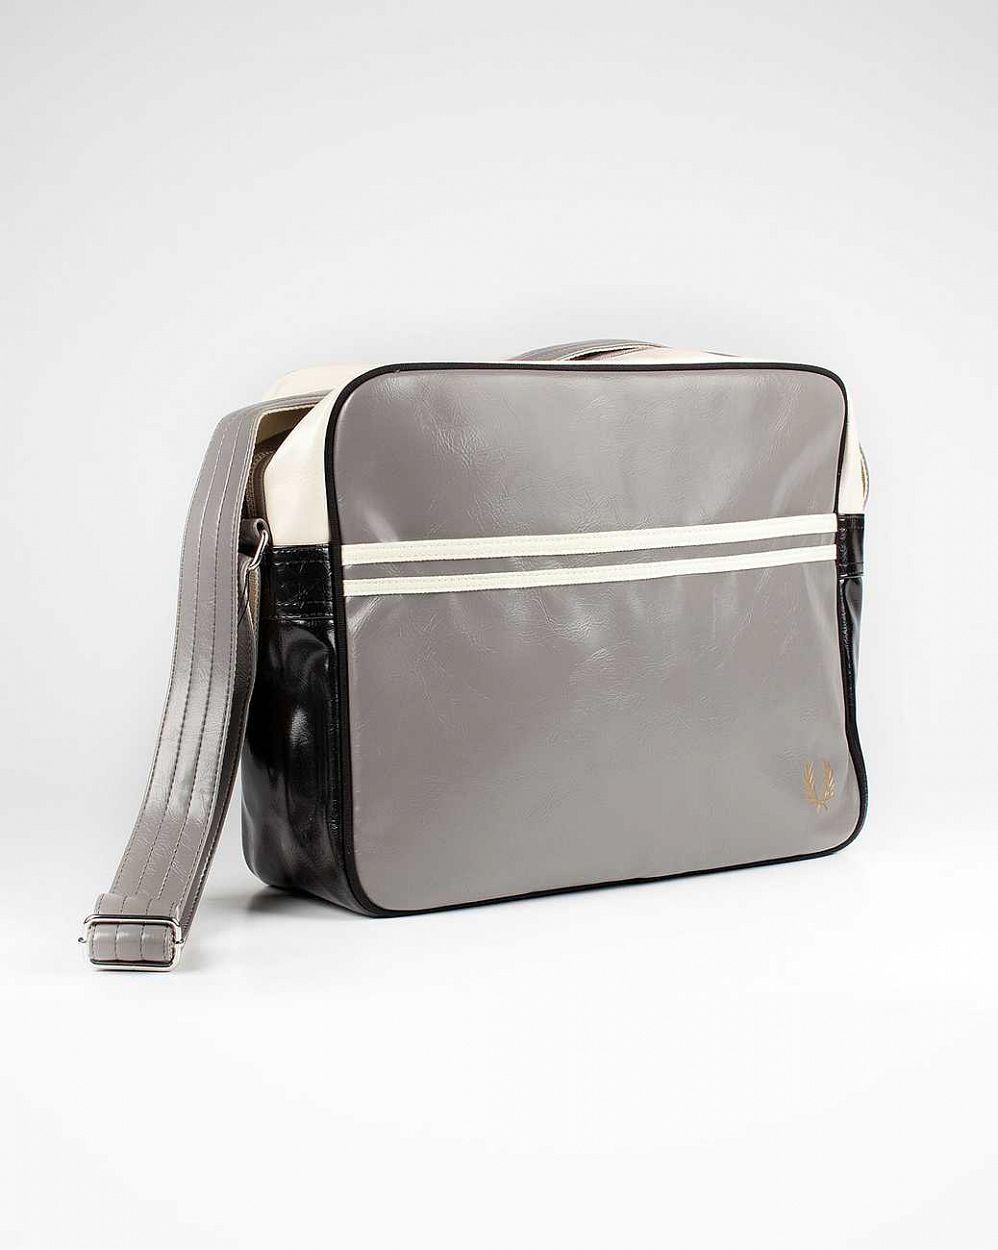 Сумка Fred Perry L1180 Classic Shoulder Bag Feather отзывы